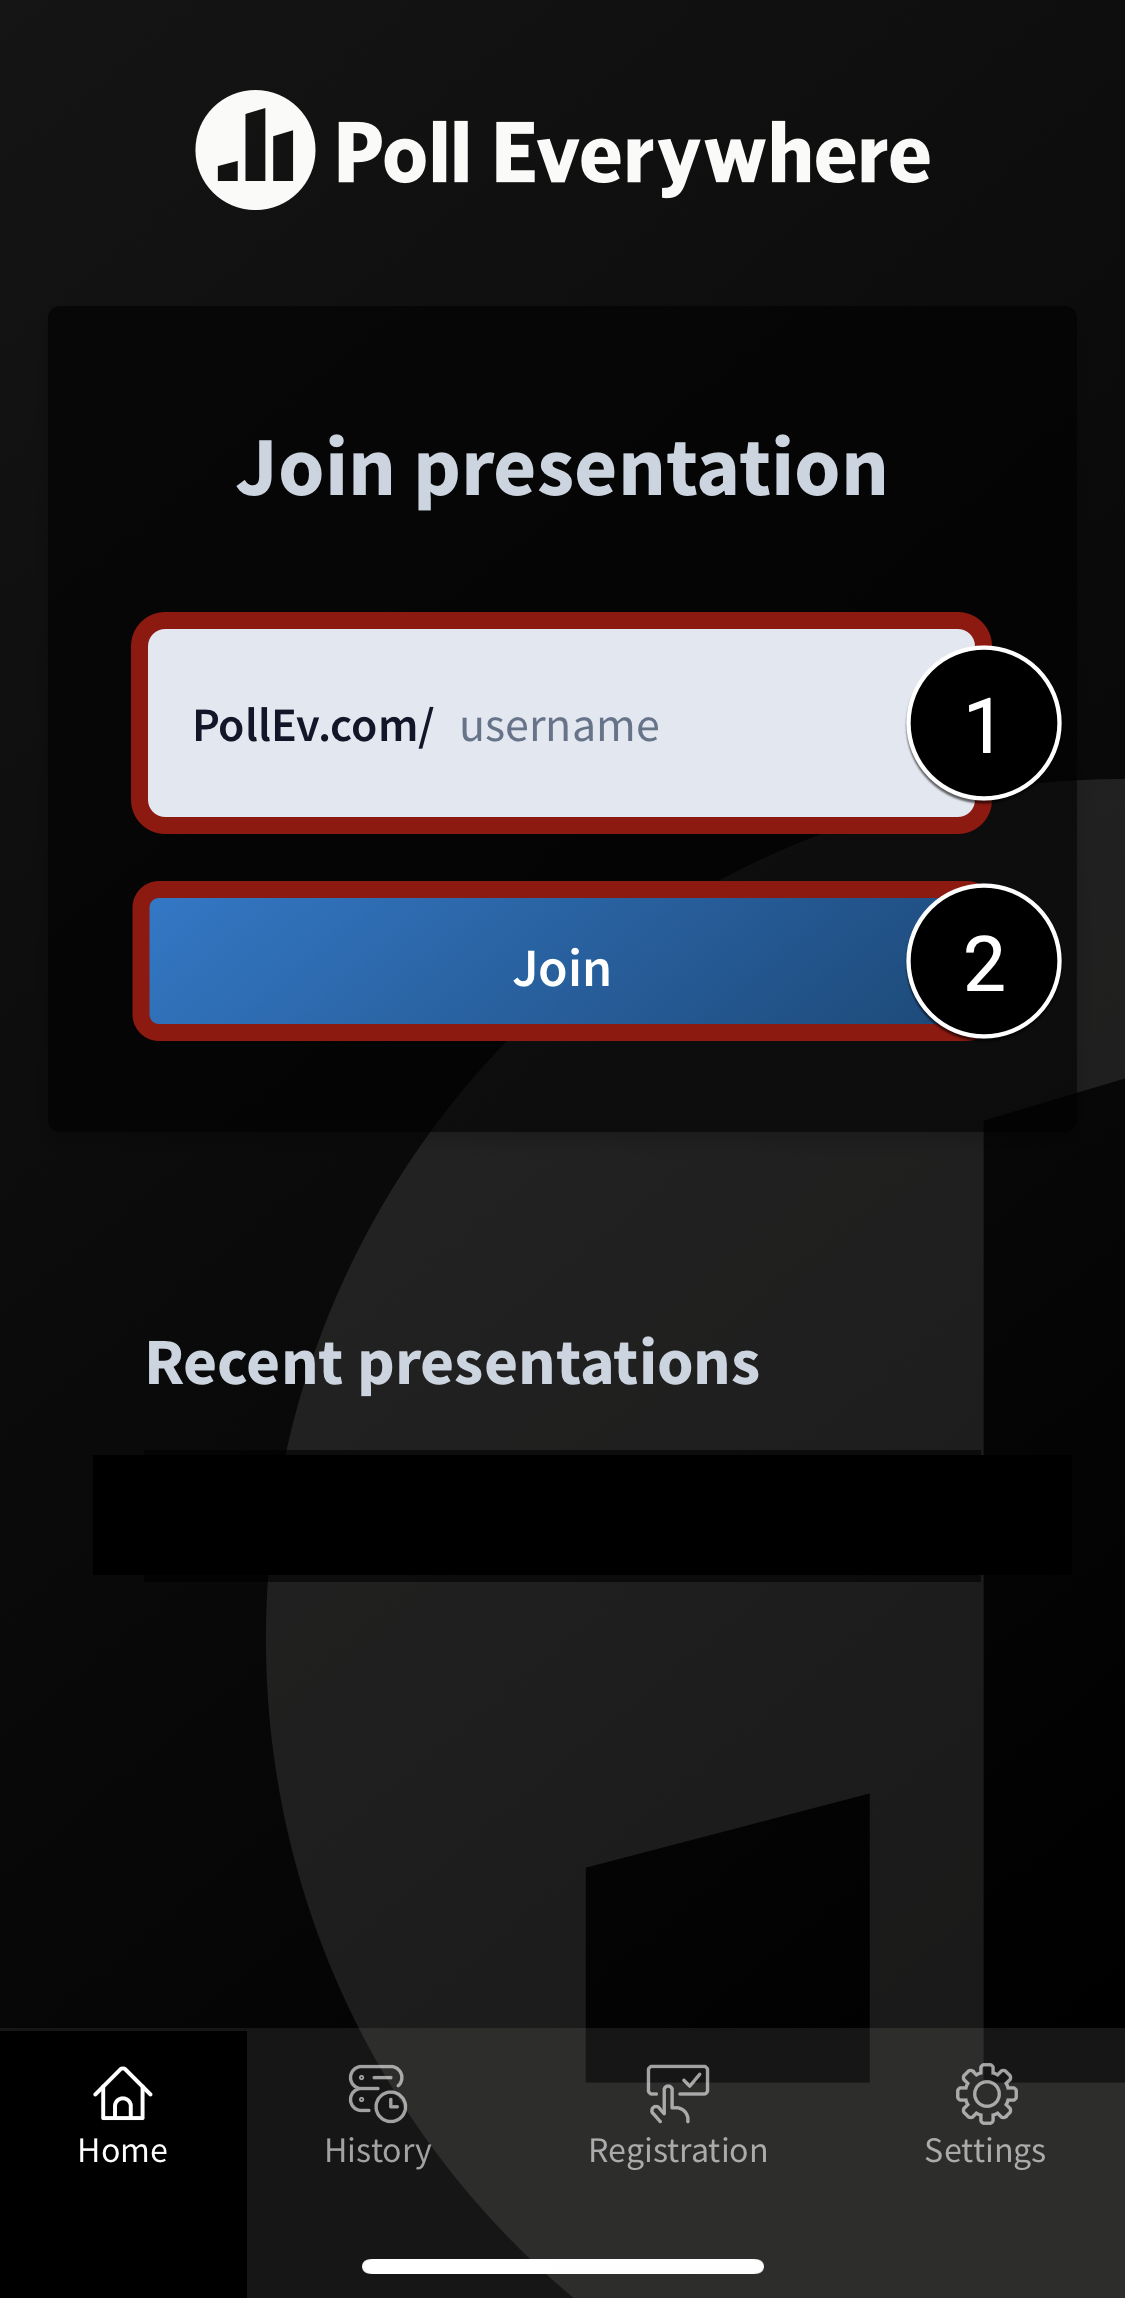 Enter the instructor's username and click Join